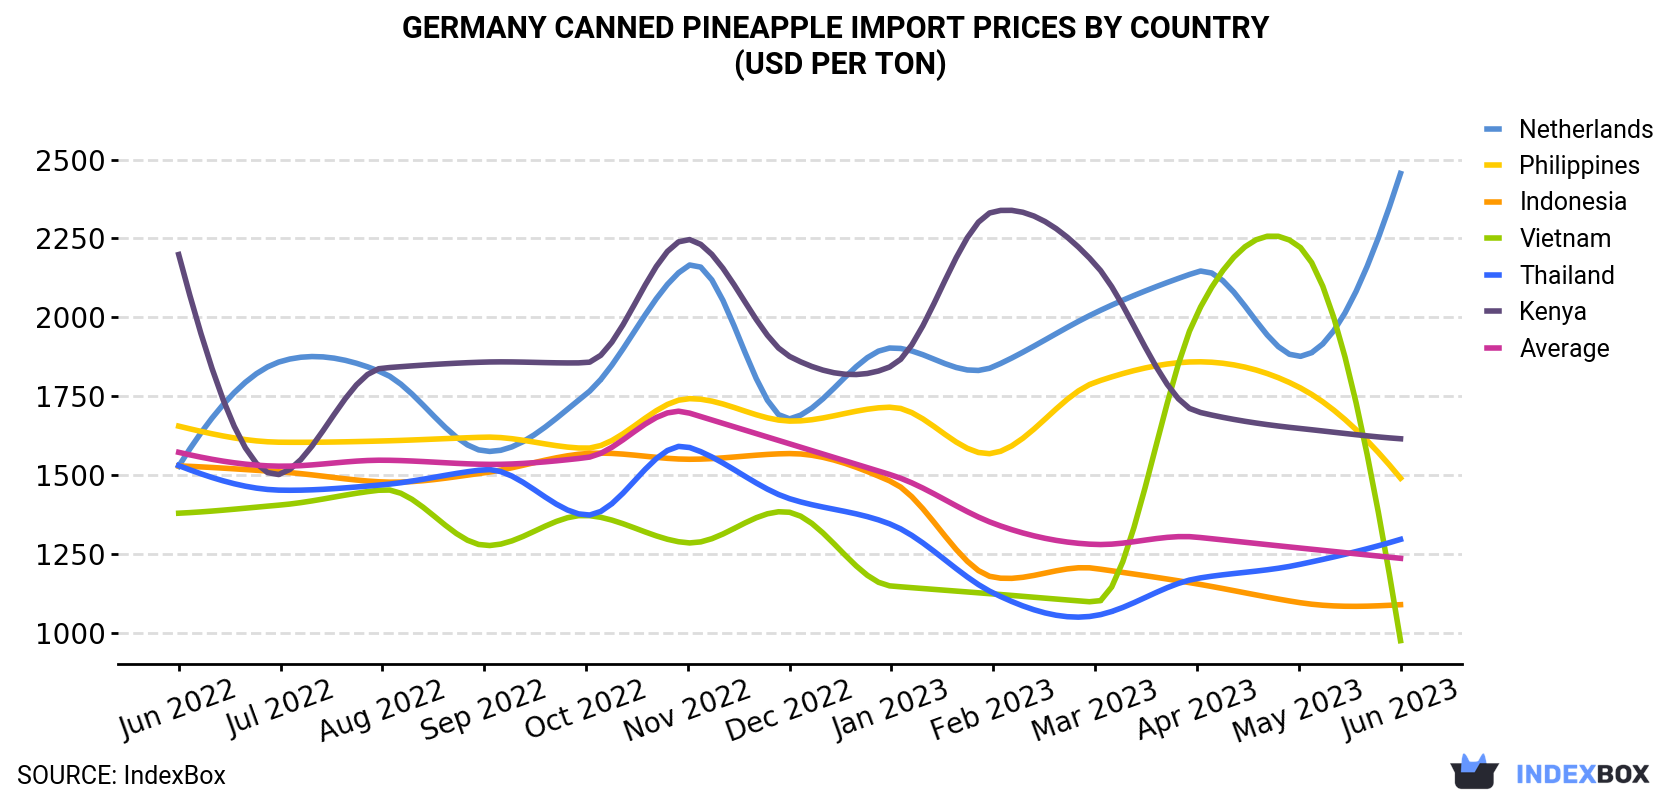 Germany Canned Pineapple Import Prices By Country (USD Per Ton)